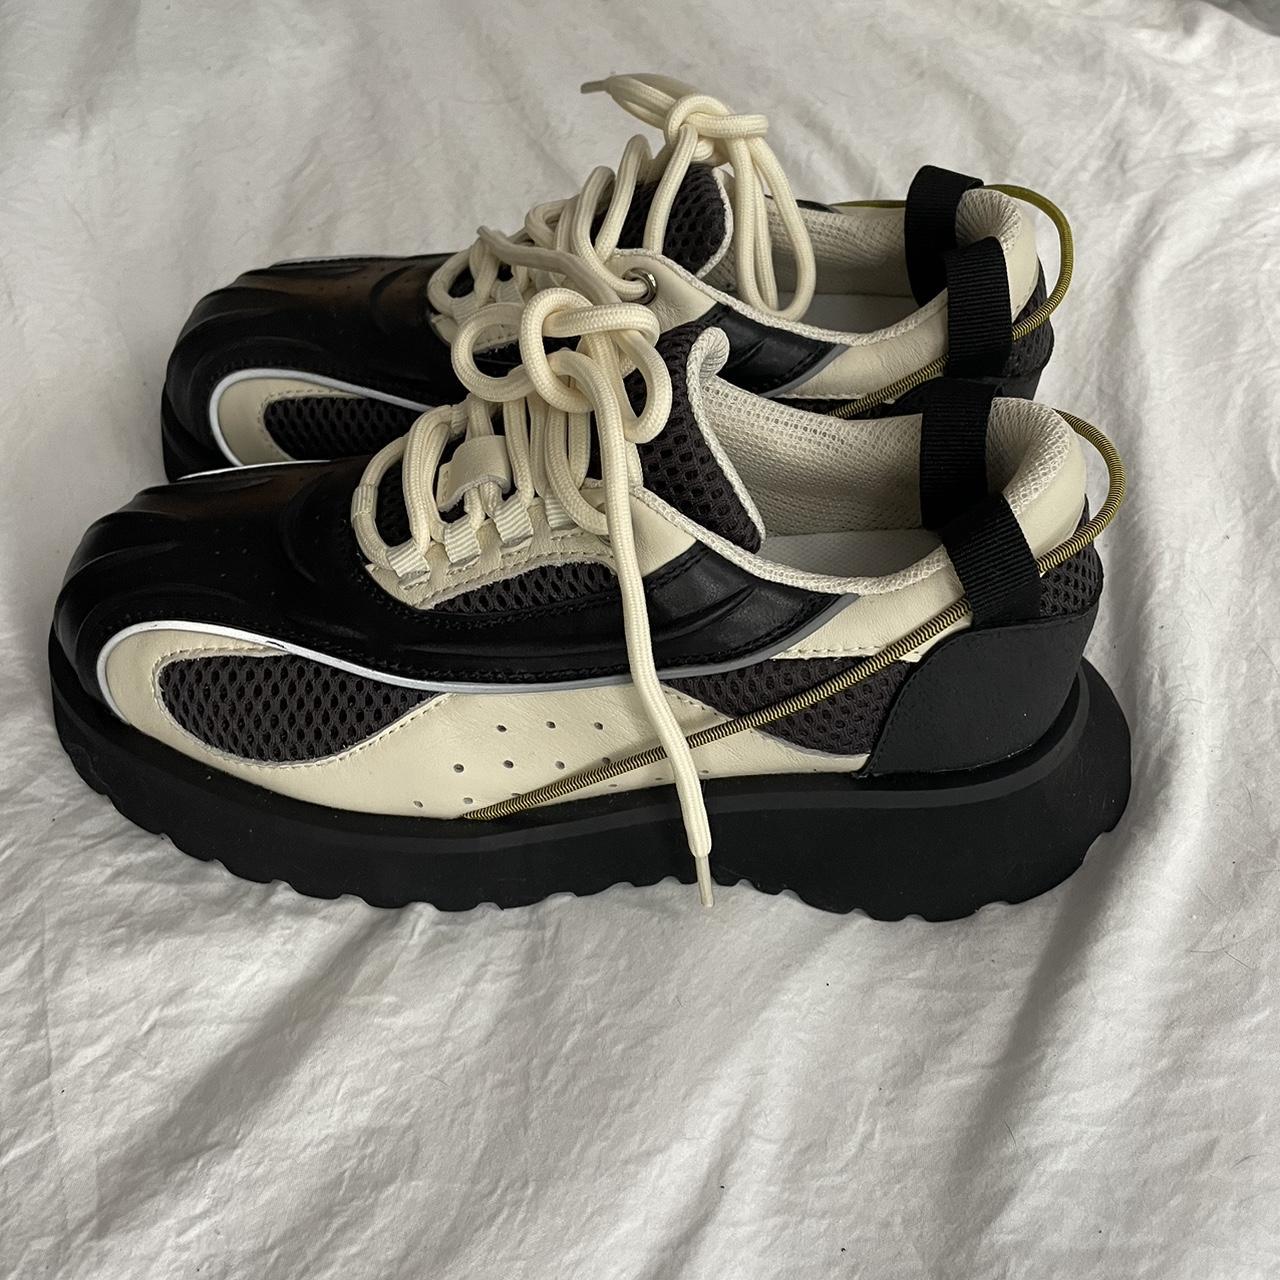 Women's Black and White Trainers